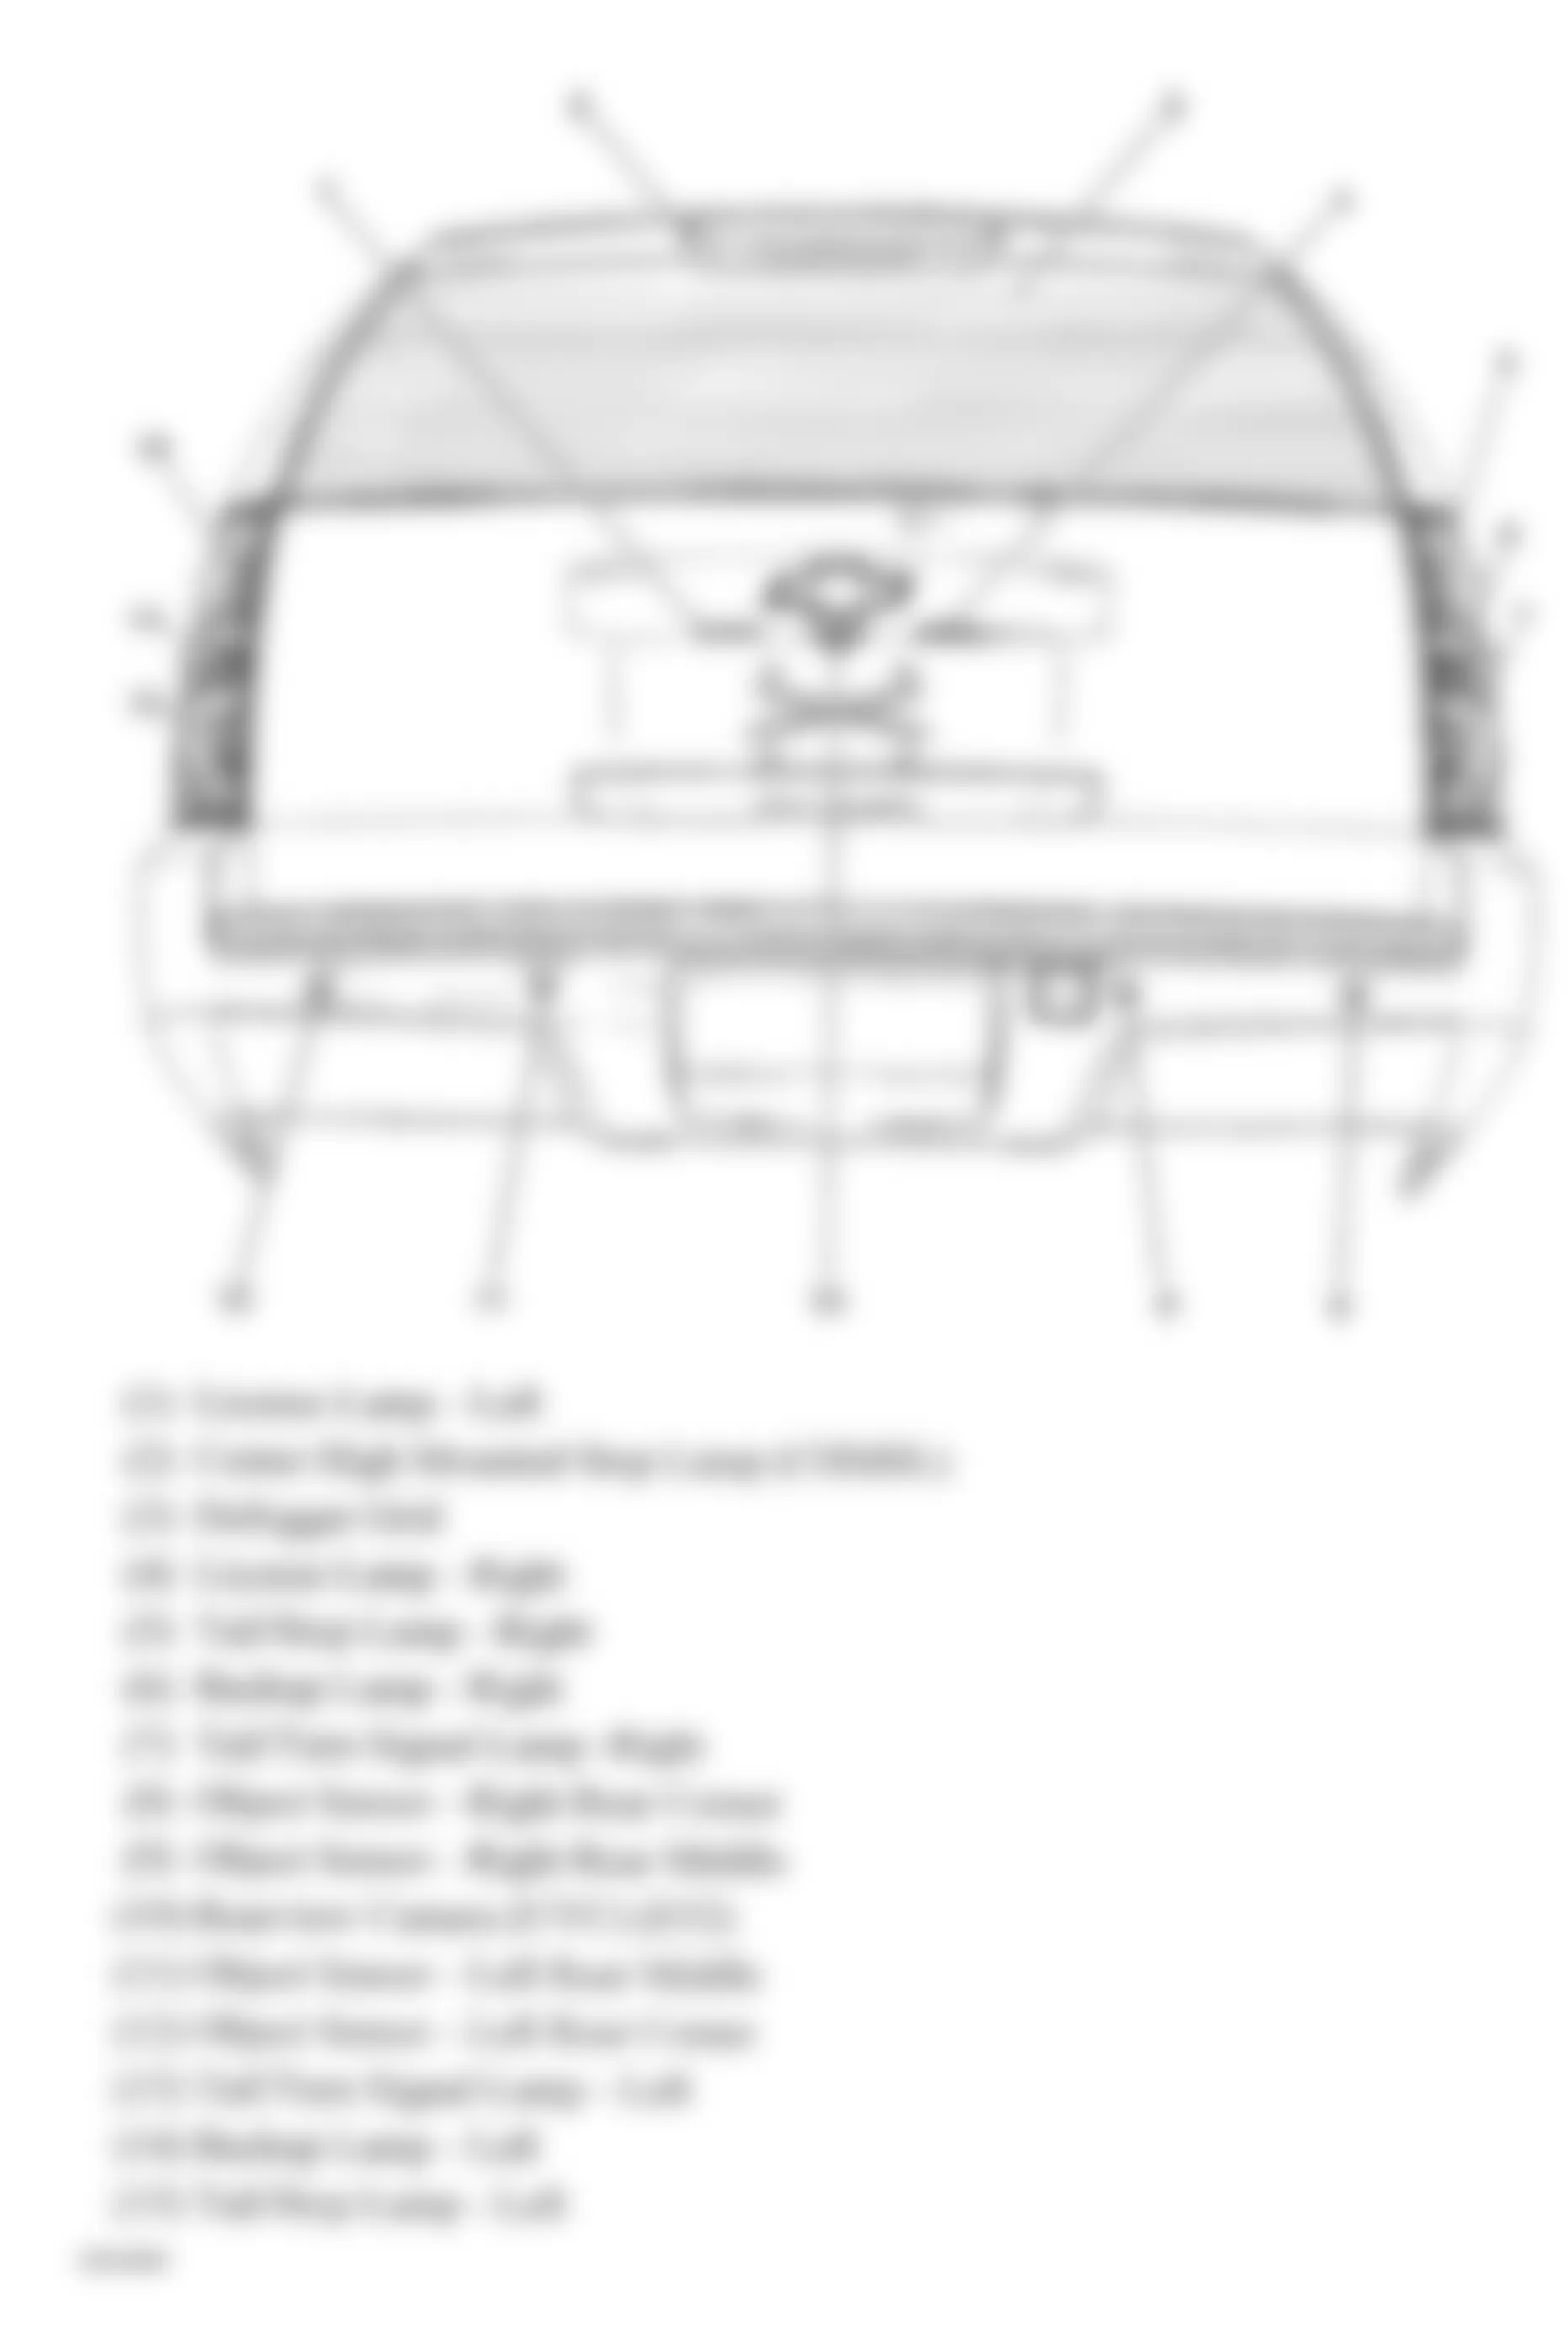 GMC Yukon 2009 - Component Locations -  Rear Of Vehicle (Avalanche, Suburban & Tahoe W/One Piece Liftgate)